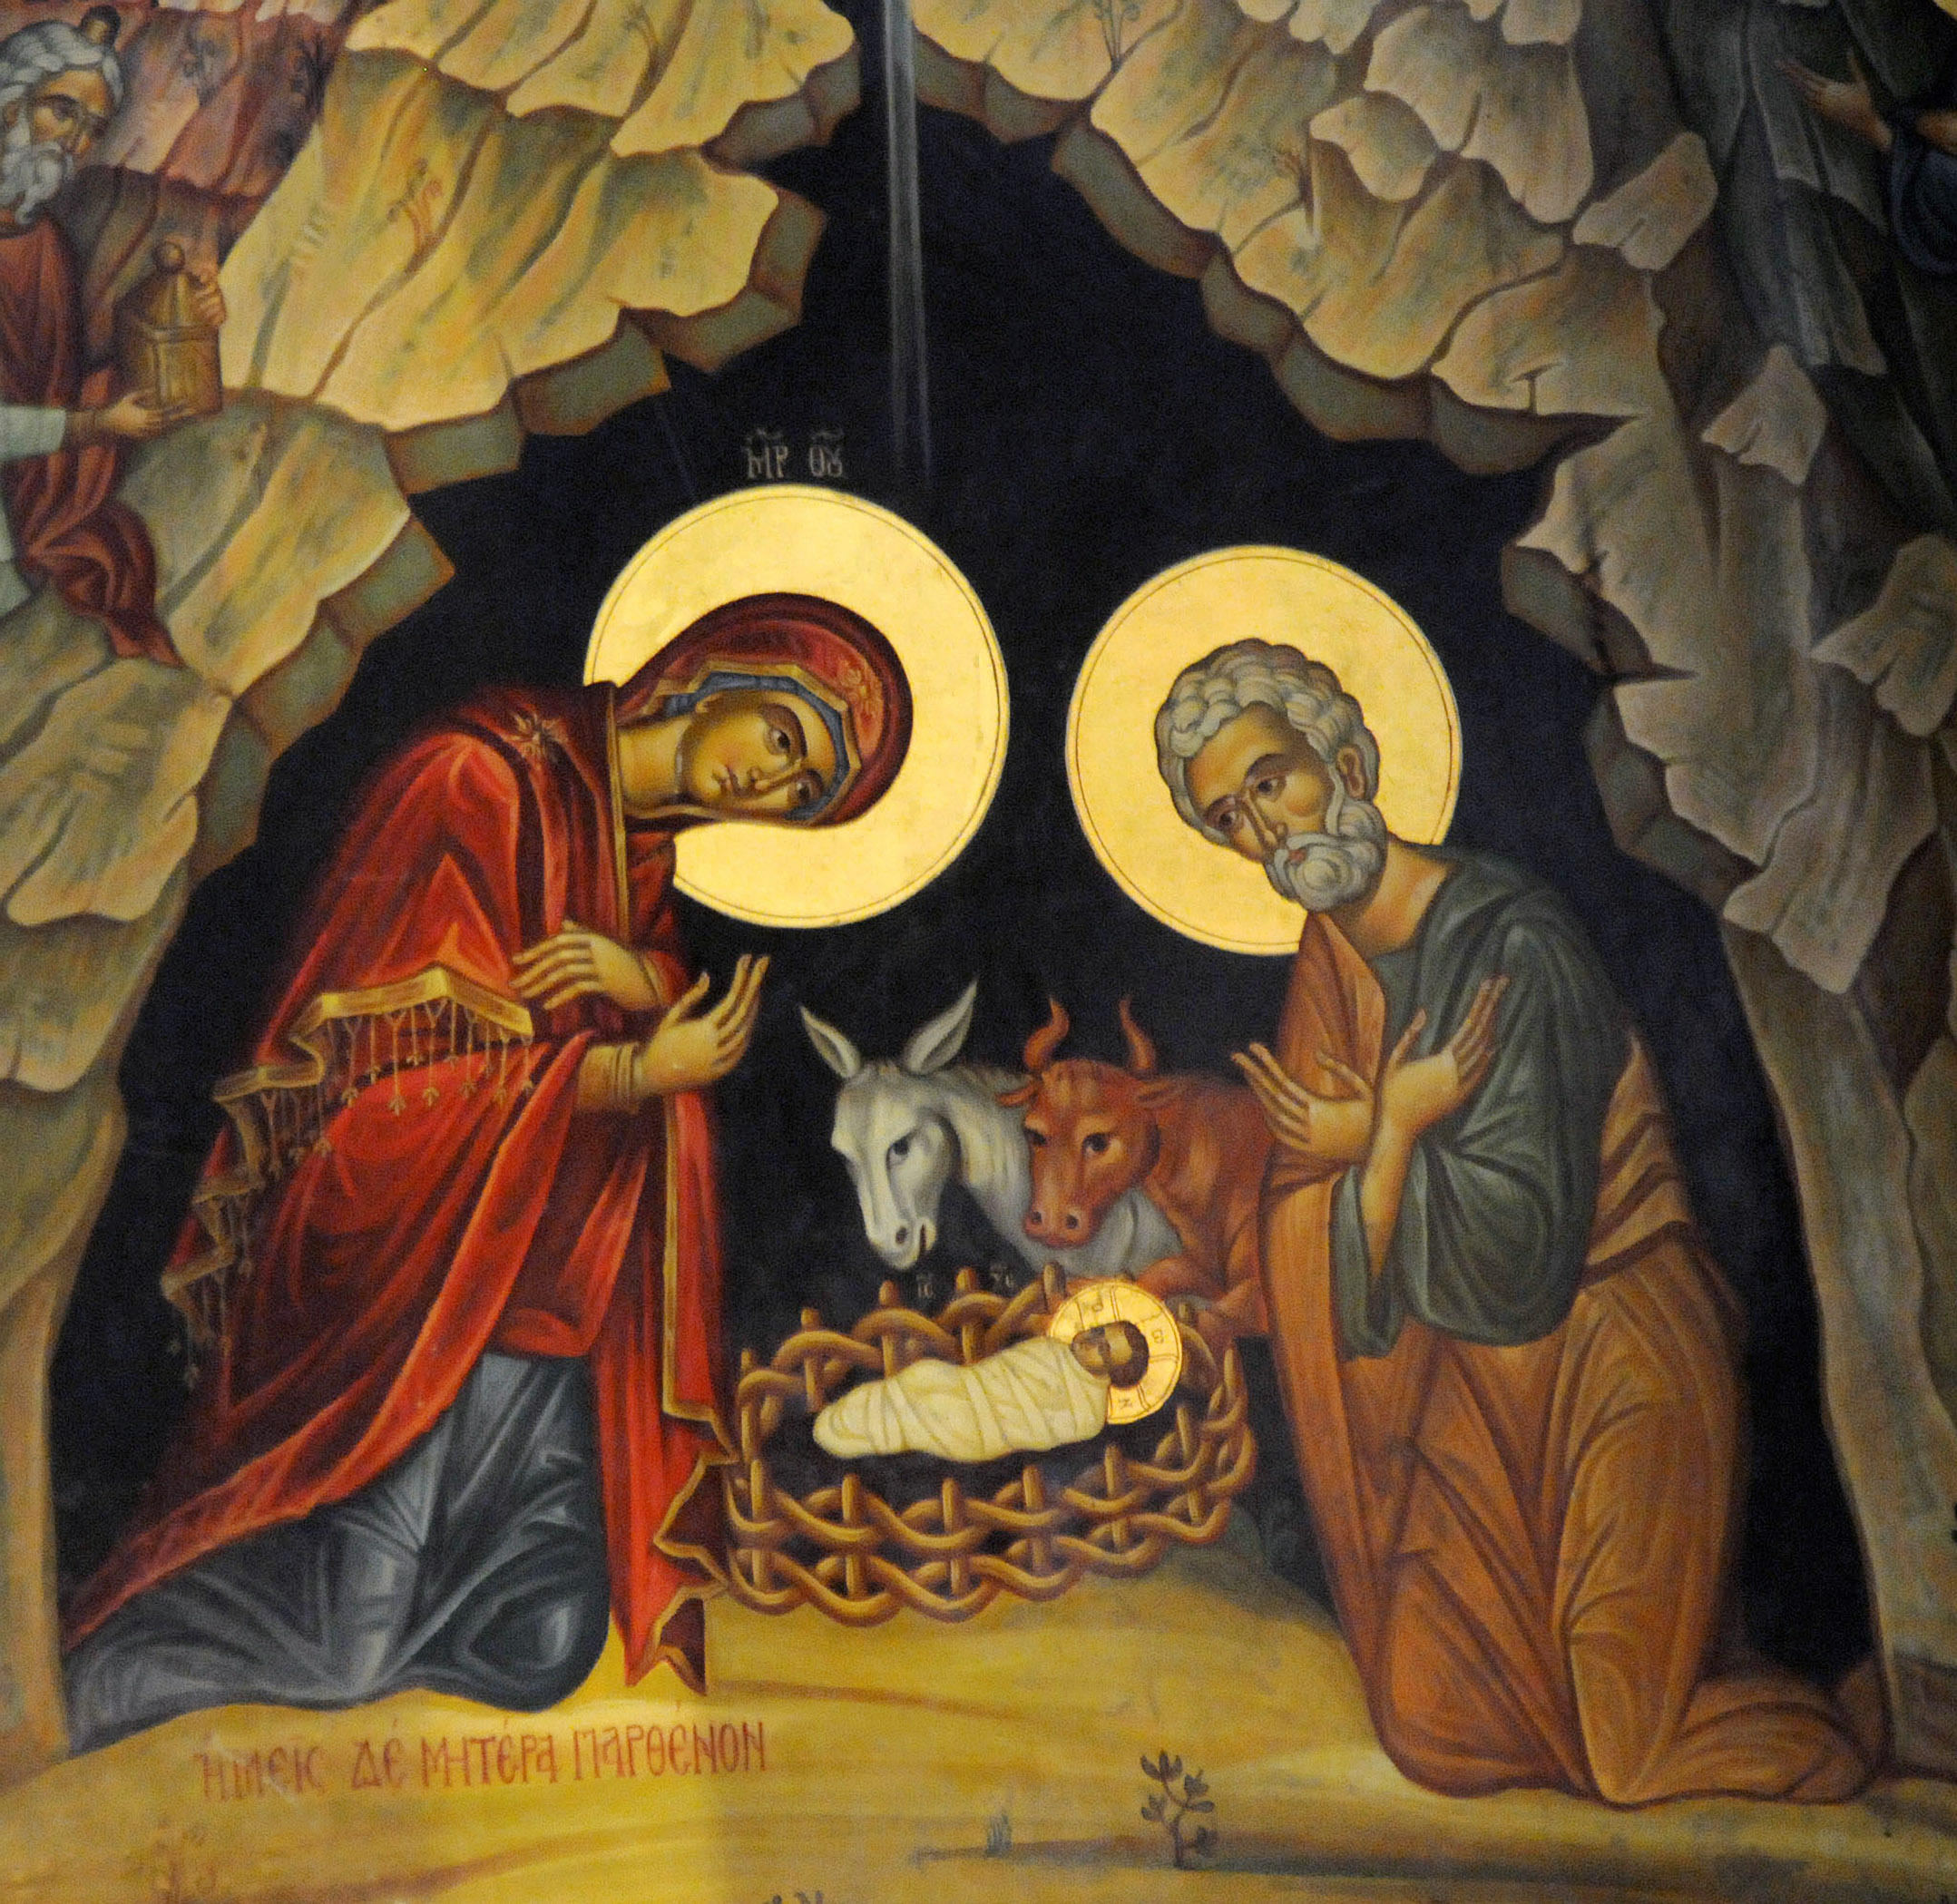 THE SOLEMNITY OF THE NATIVITY, YEAR A.